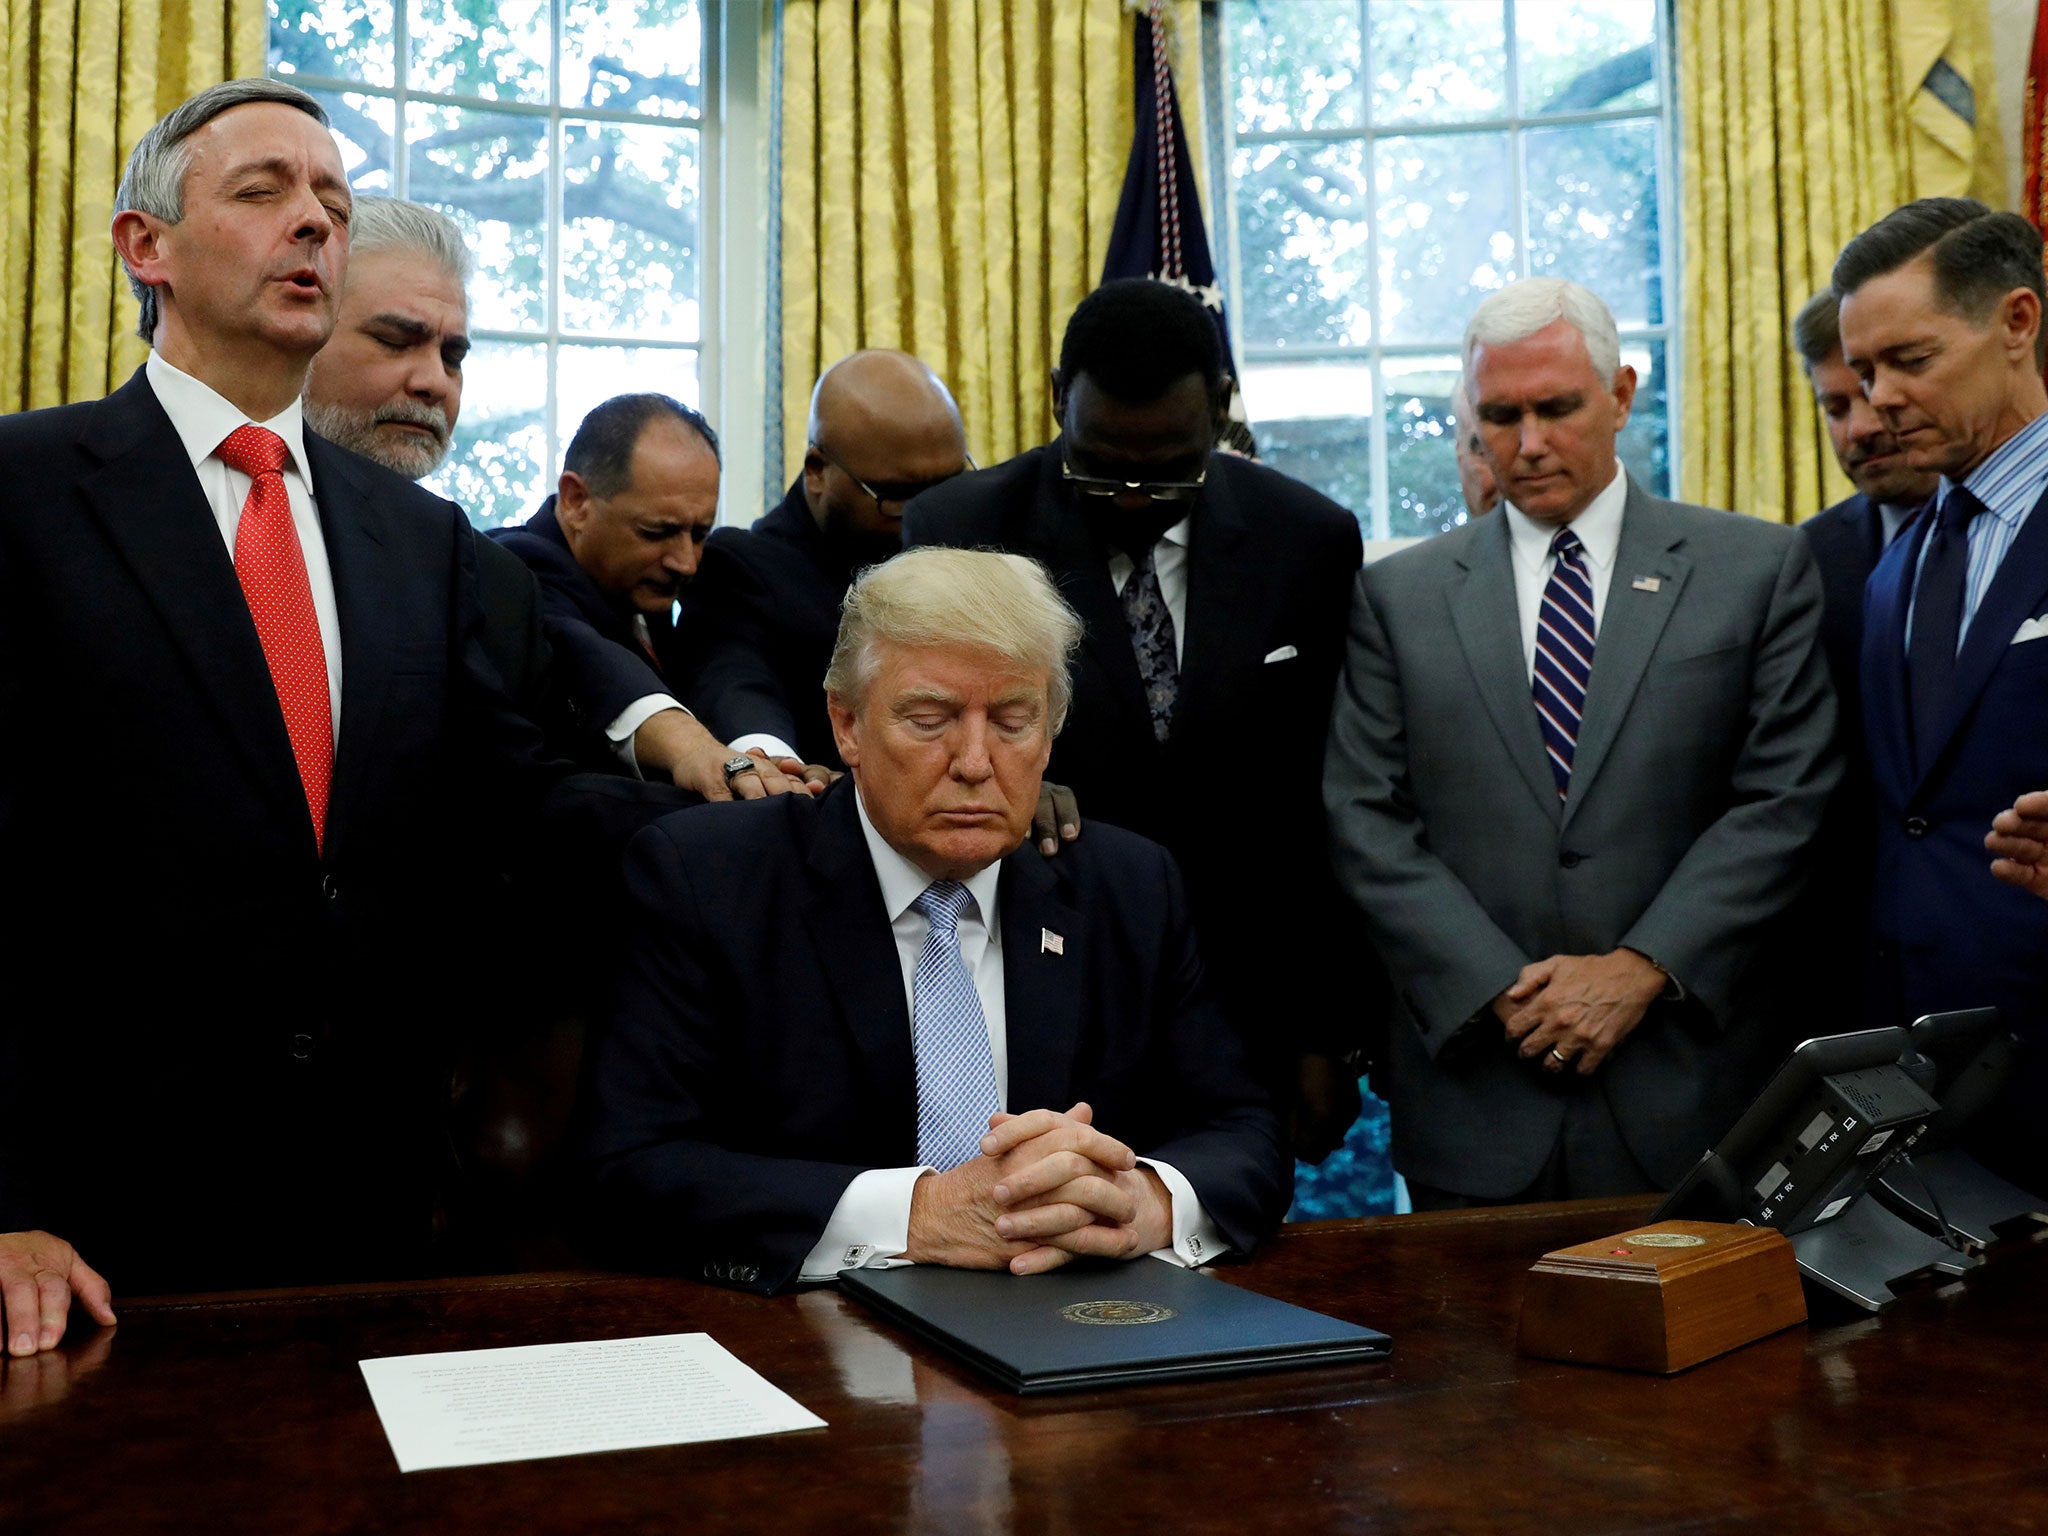 Faith leaders place their hands on the shoulders of Donald Trump as he takes part in a prayer for those affected by Hurricane Harvey earlier this month